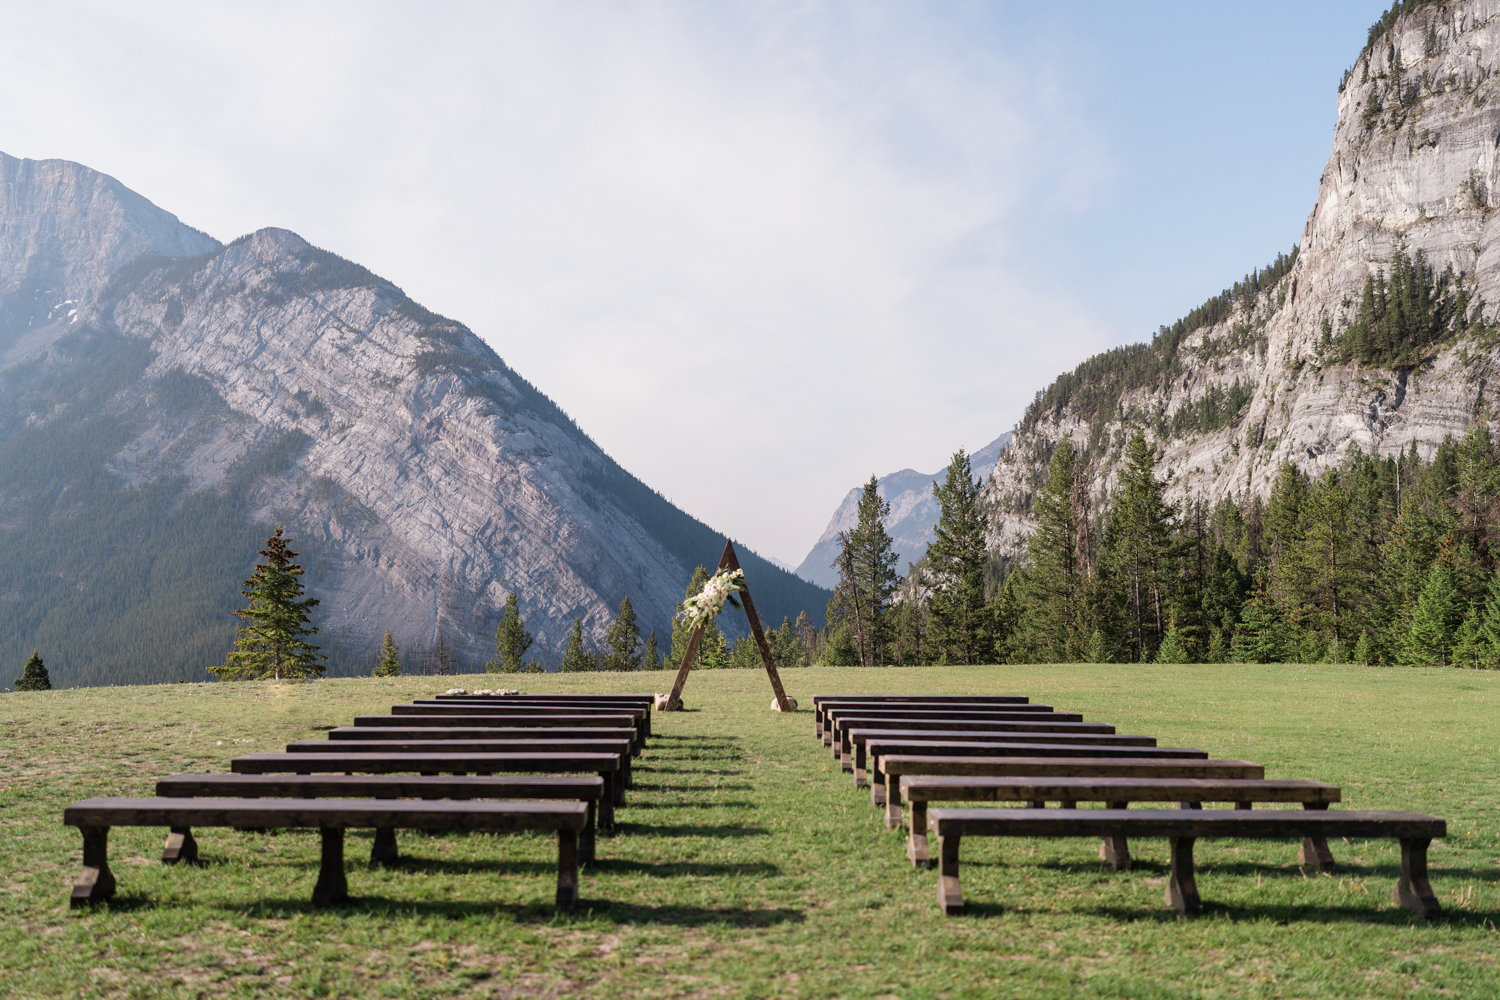 Tunnel Mountain in Banff wedding ceremony set up with triangle arch with flowers and rows of wood bench seating